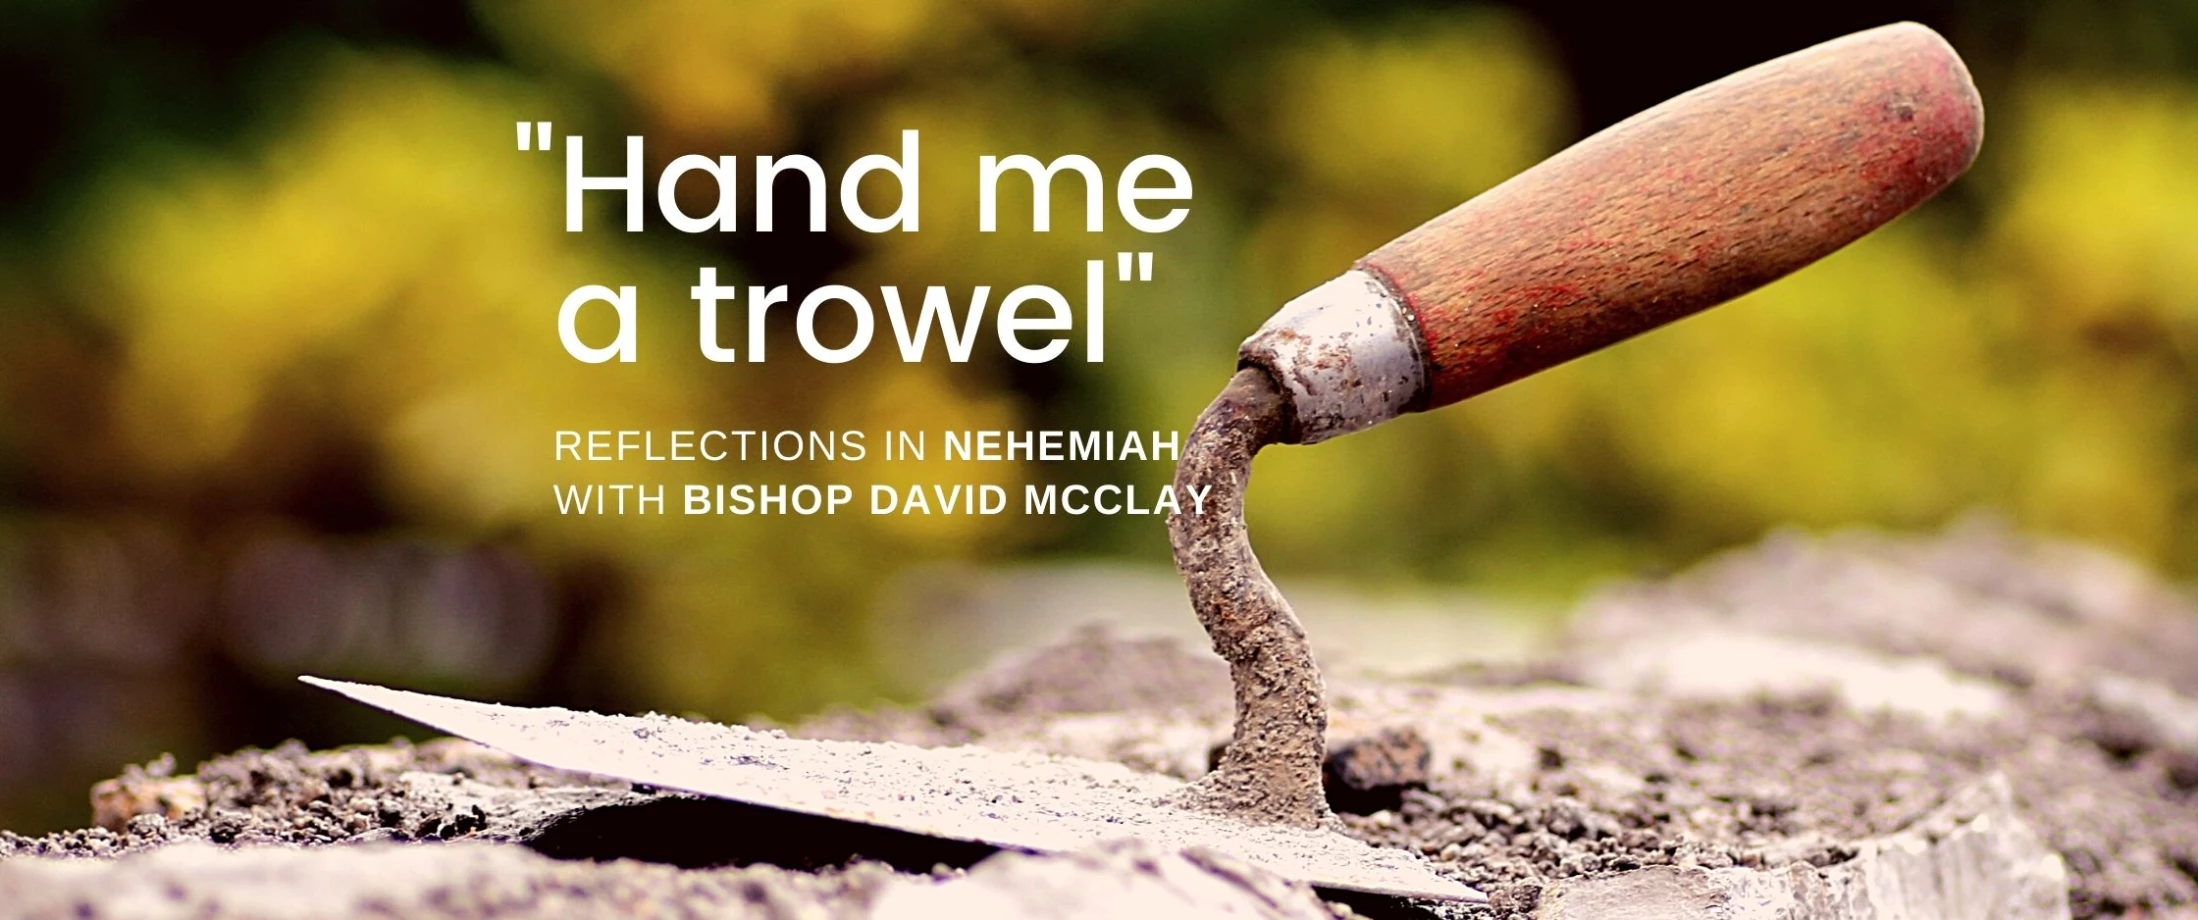 Reflections in Nehemiah for Lent Day 10